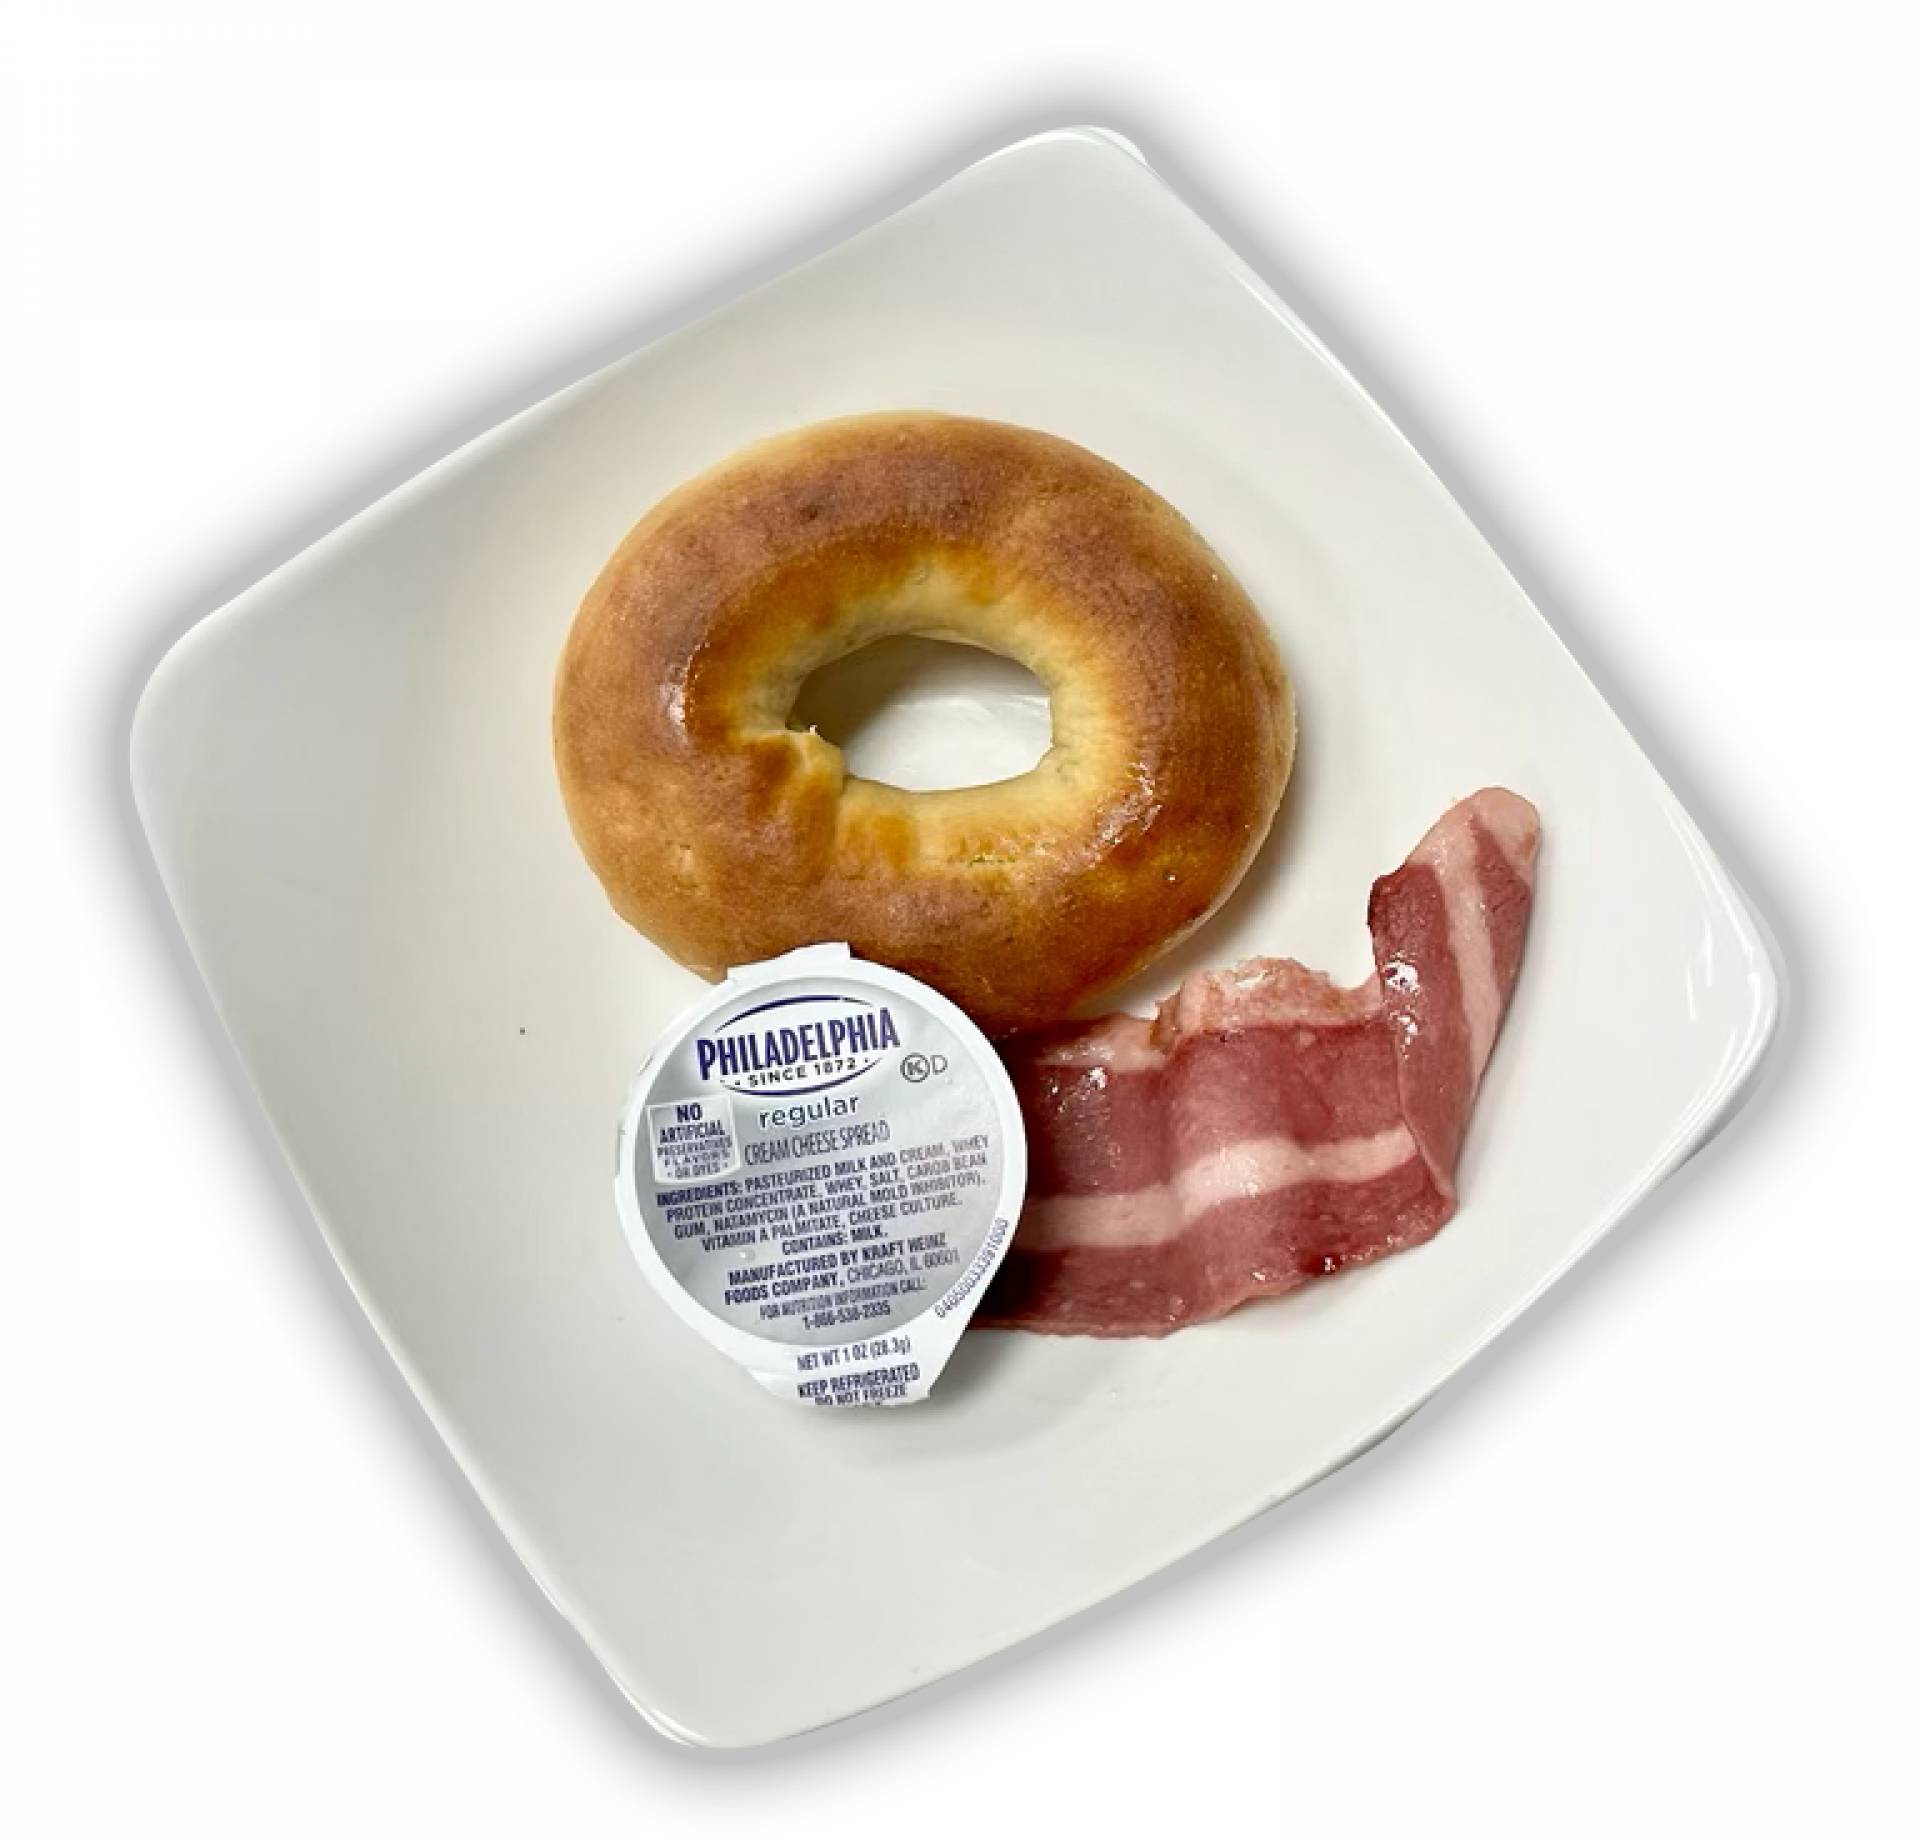 Breakfast Bagel with Cream Cheese and Turkey Bacon - Keto